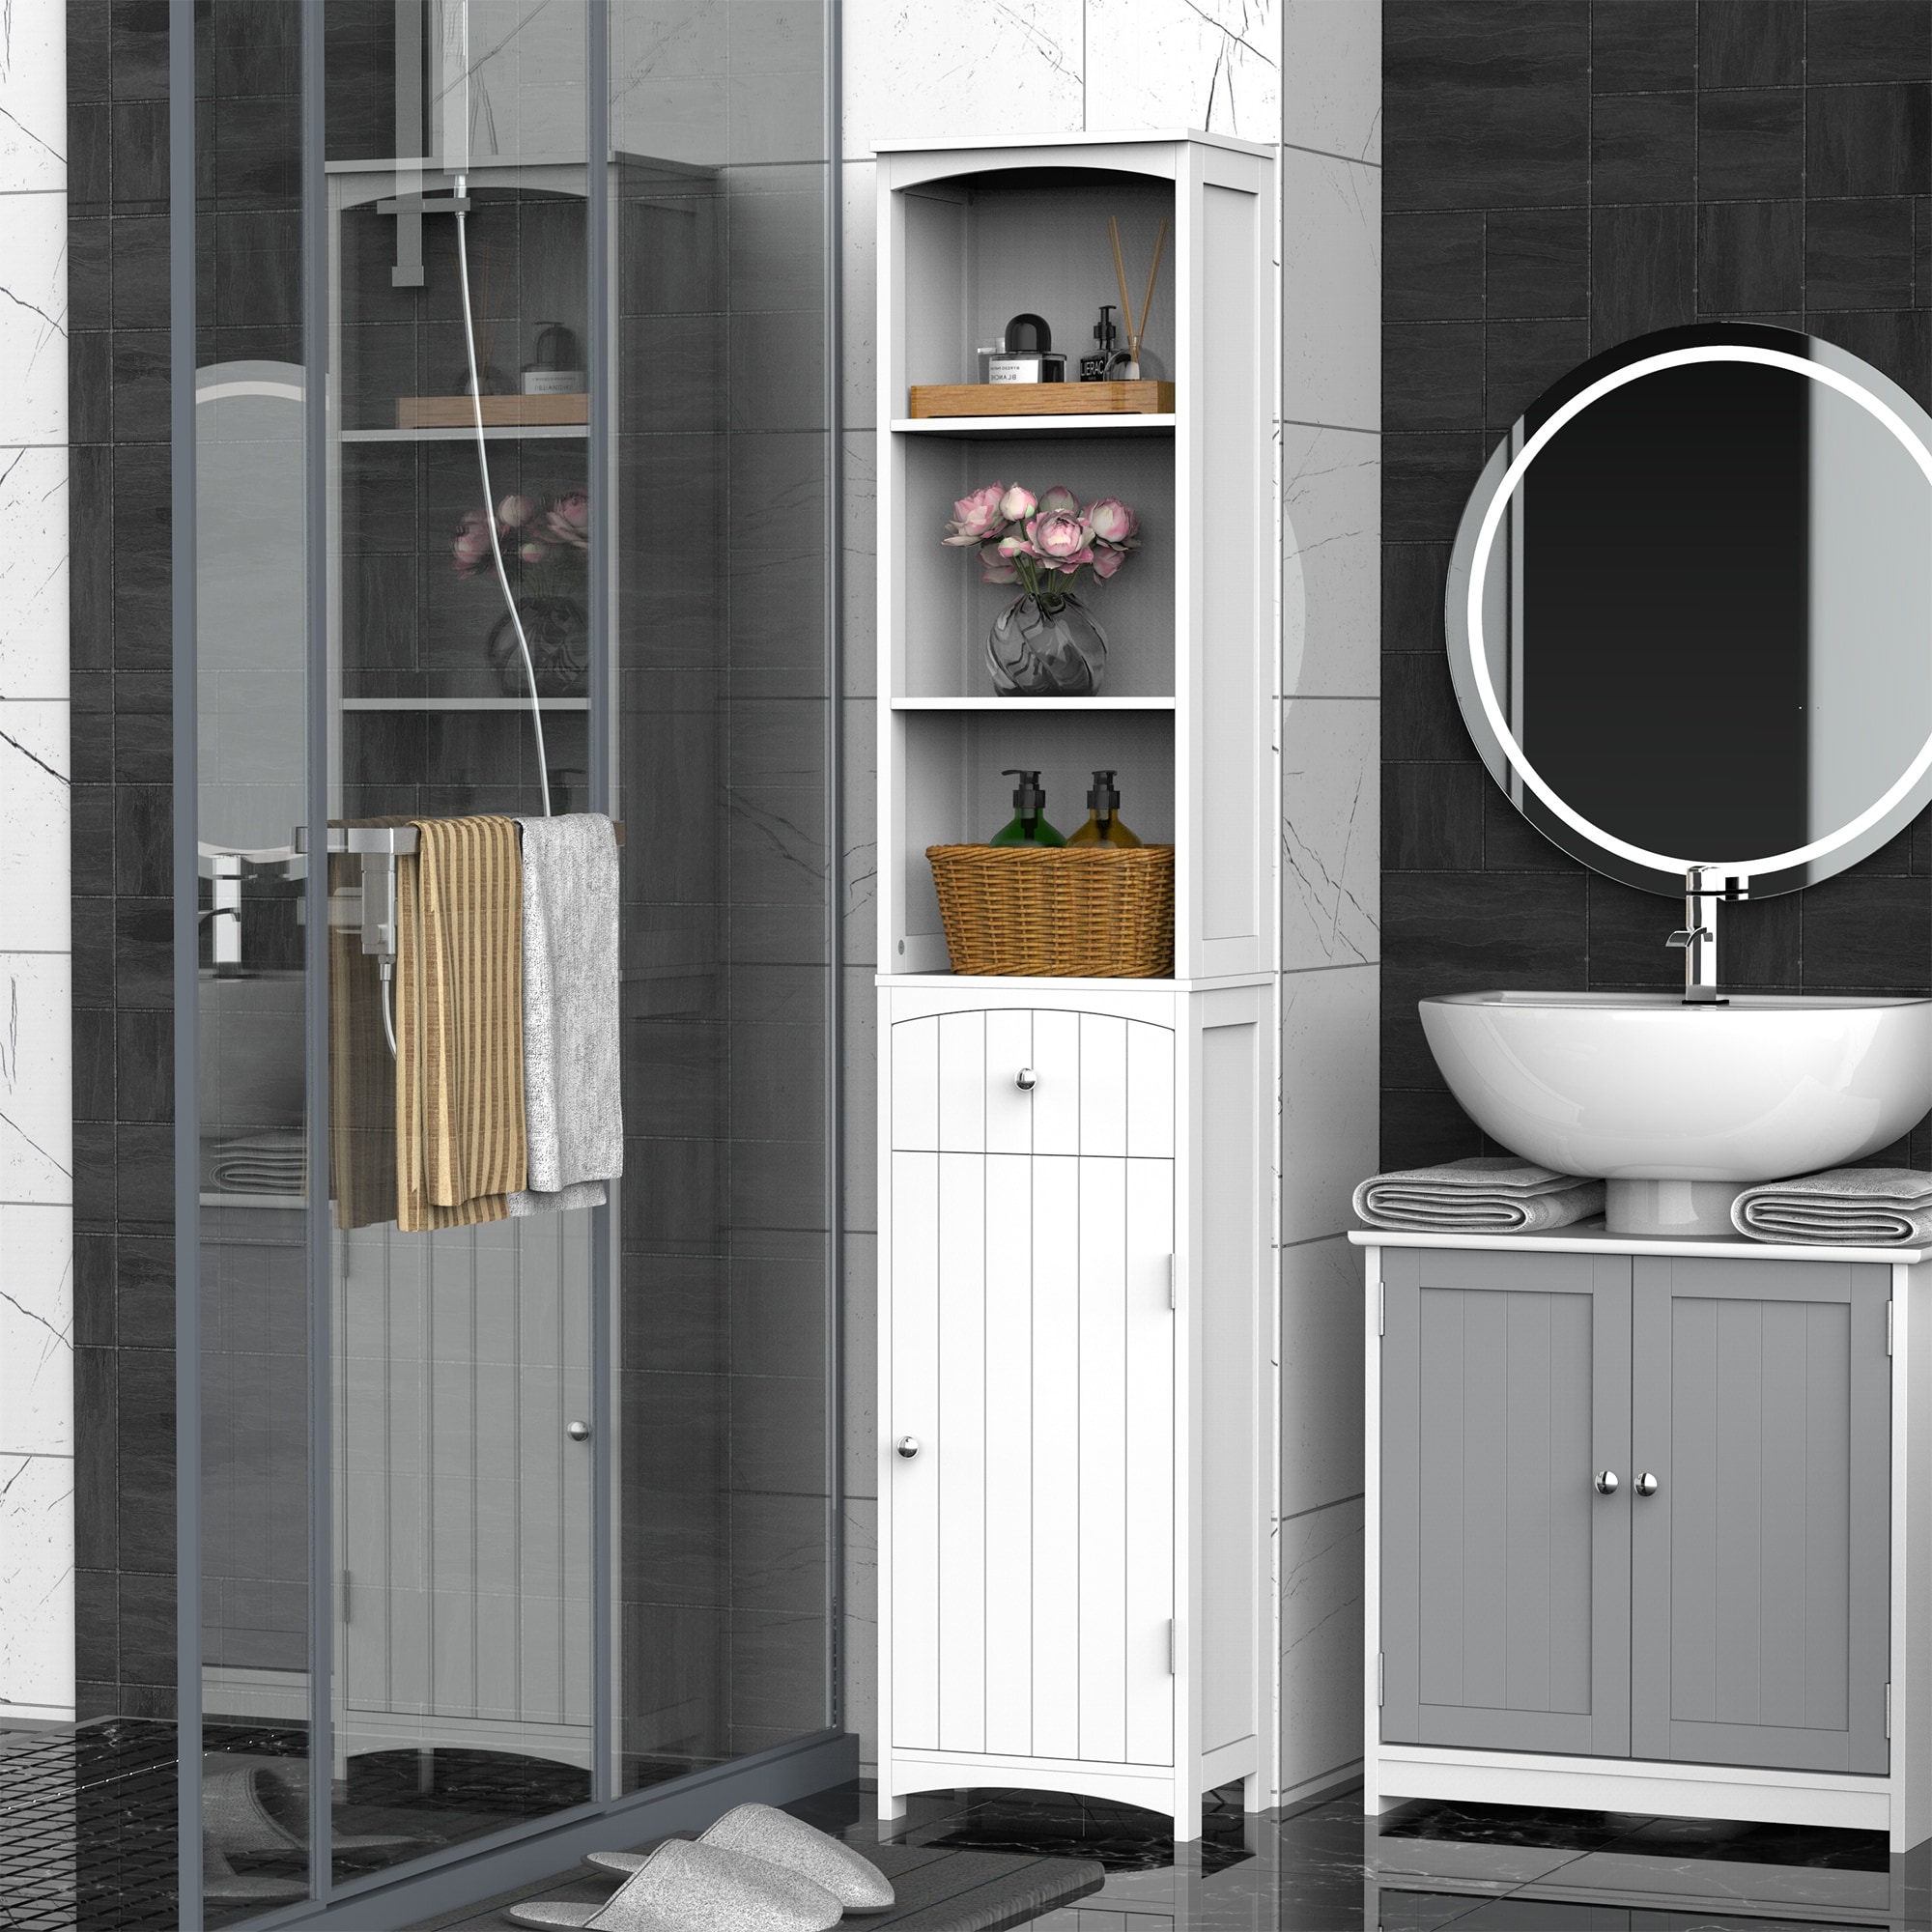 https://ak1.ostkcdn.com/images/products/is/images/direct/6052c9faa68bc59f84f062e7a123d66df9ca6ae7/HOMCOM-67%22-Tall-Bathroom-Storage-Cabinet%2C-Freestanding-Linen-Tower-with-3-Tier-Shelf%2C-Narrow-Side-Floor-Organizer%2C-White.jpg